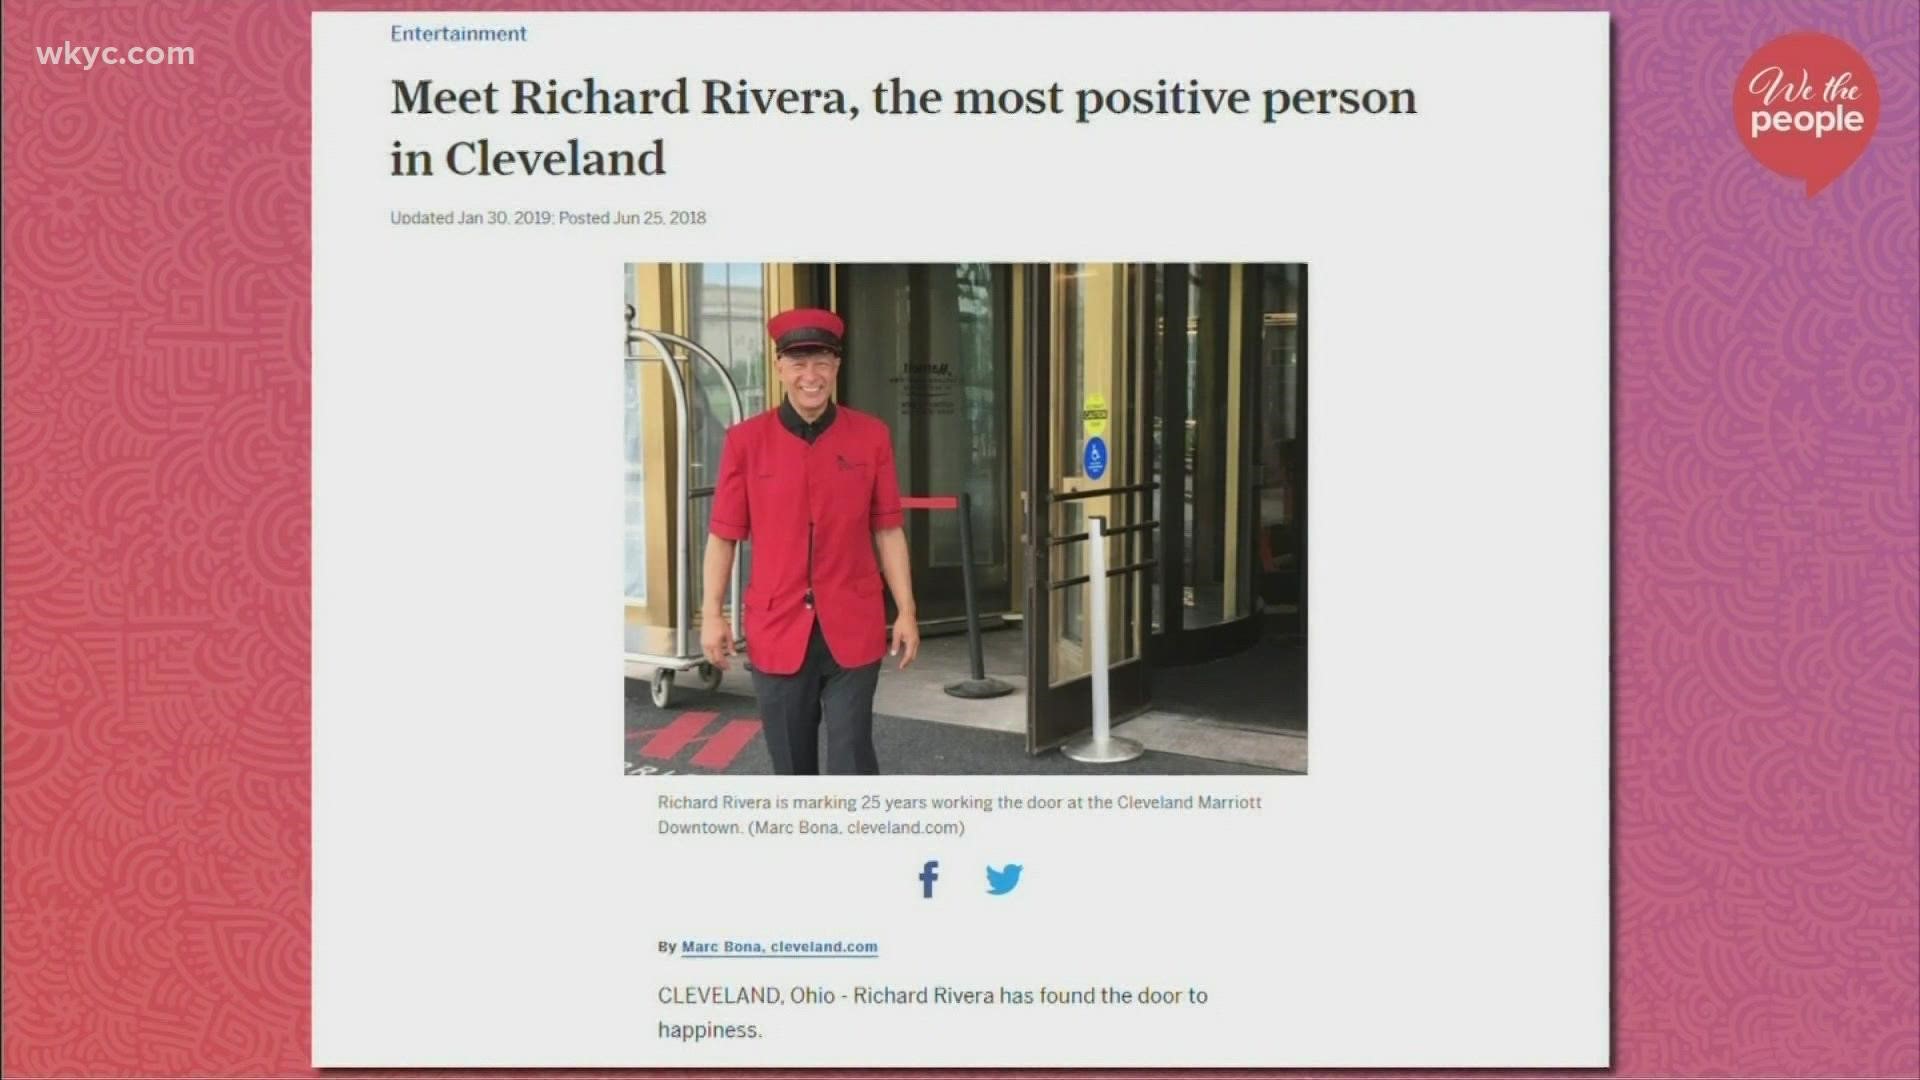 Leon is speaking with Richard Rivera, the most positive person in Cleveland!